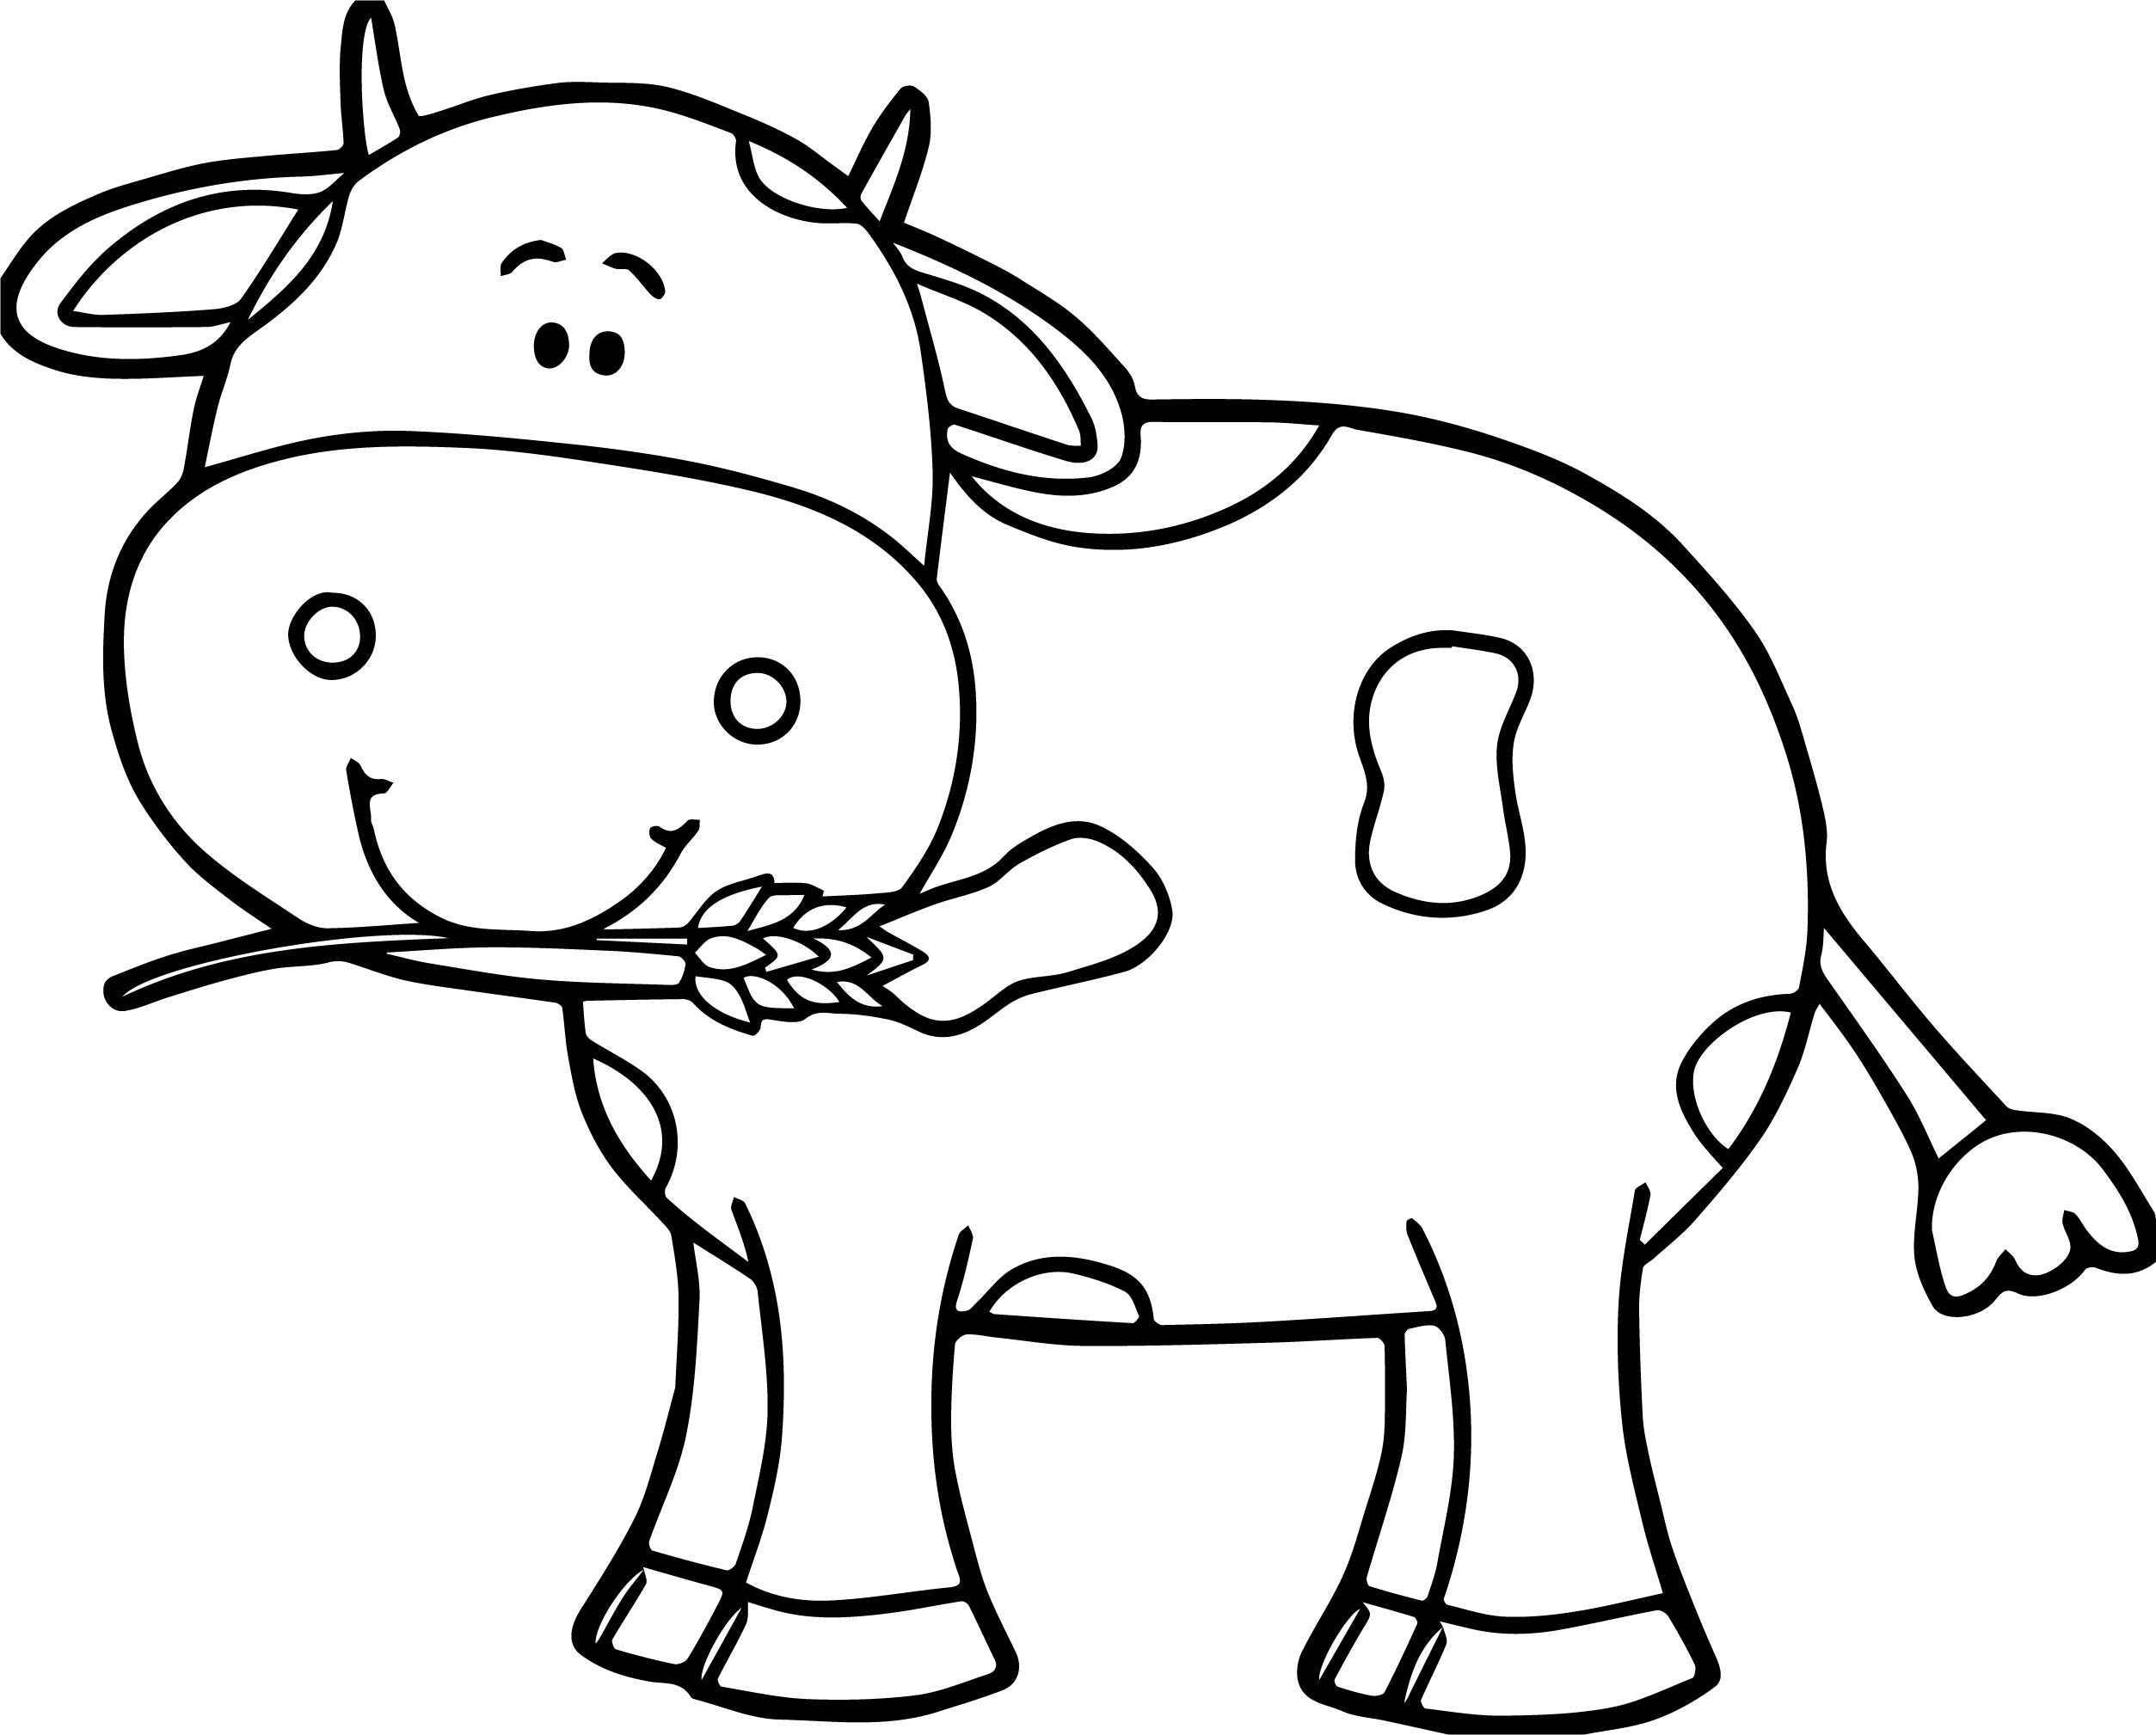 Cow Coloring Pages Free Printable
 Cow Head Coloring Page at GetColorings